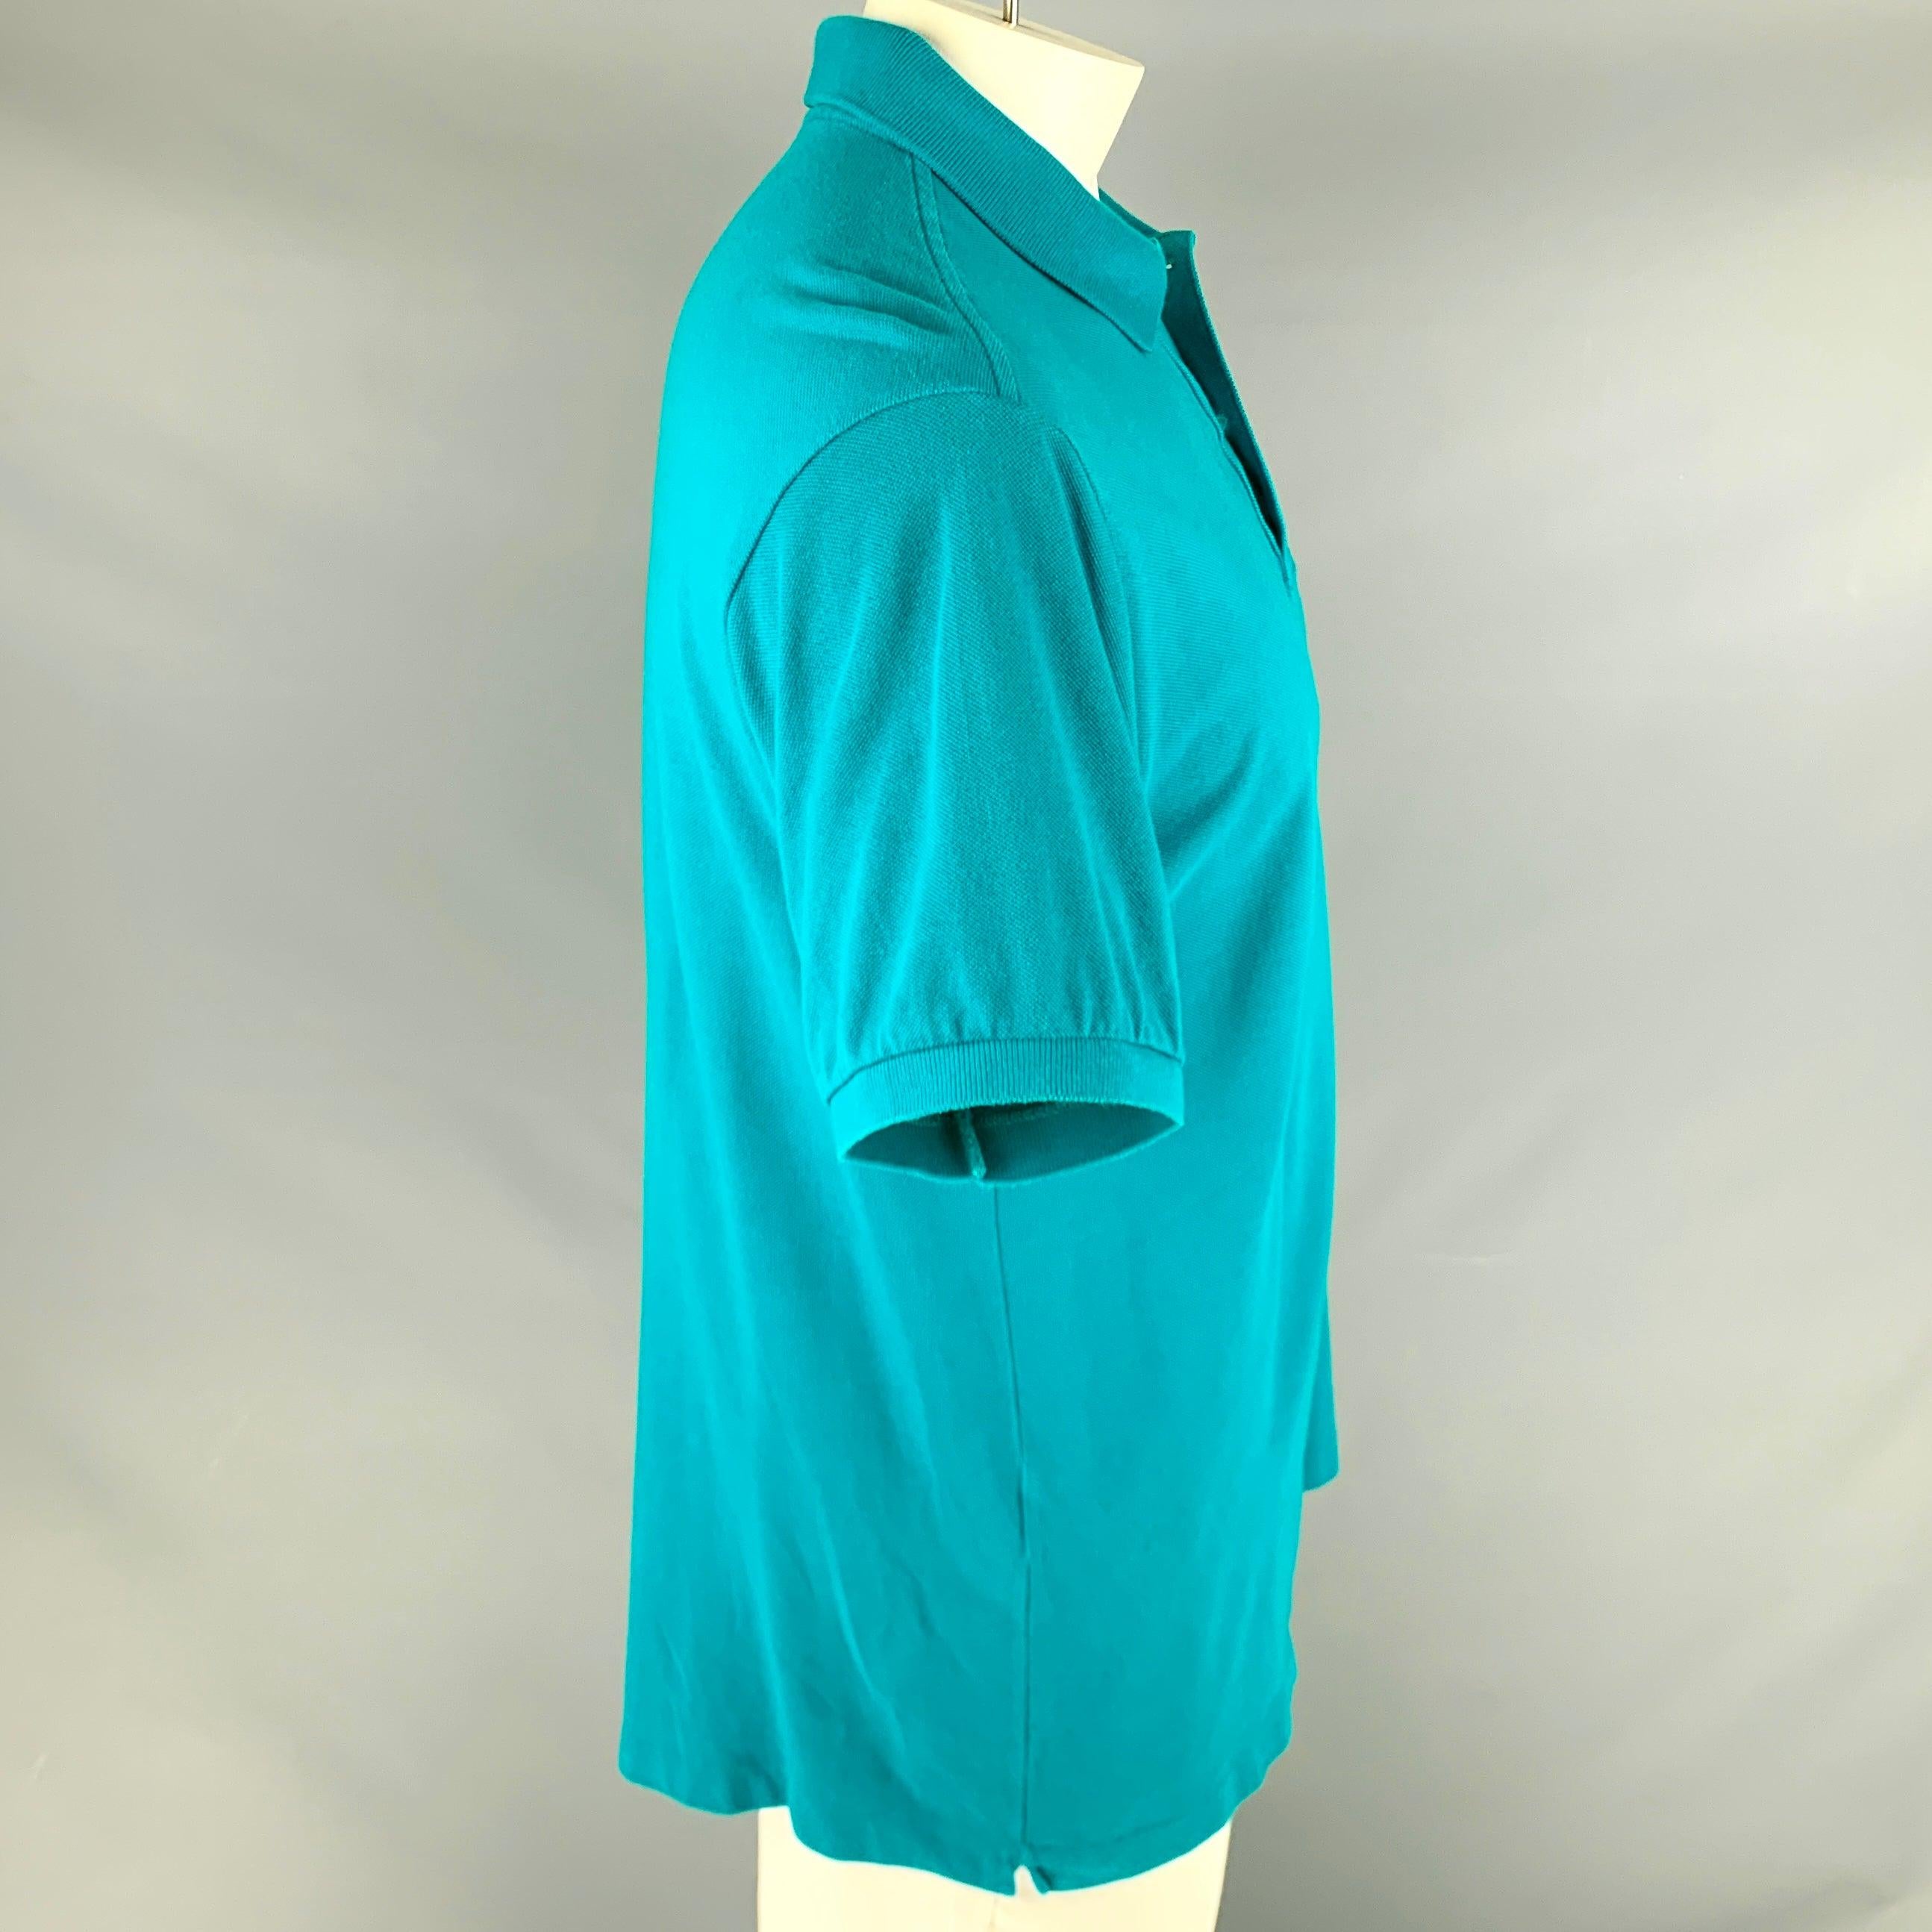 LACOSTE polo
in an aqua blue cotton fabric featuring signature alligator logo, spread collar, and half placket button closure. Made in France.Very Good Pre-Owned Condition. Minor signs of wear. 

Marked:   6 

Measurements: 
 
Shoulder: 19 inches